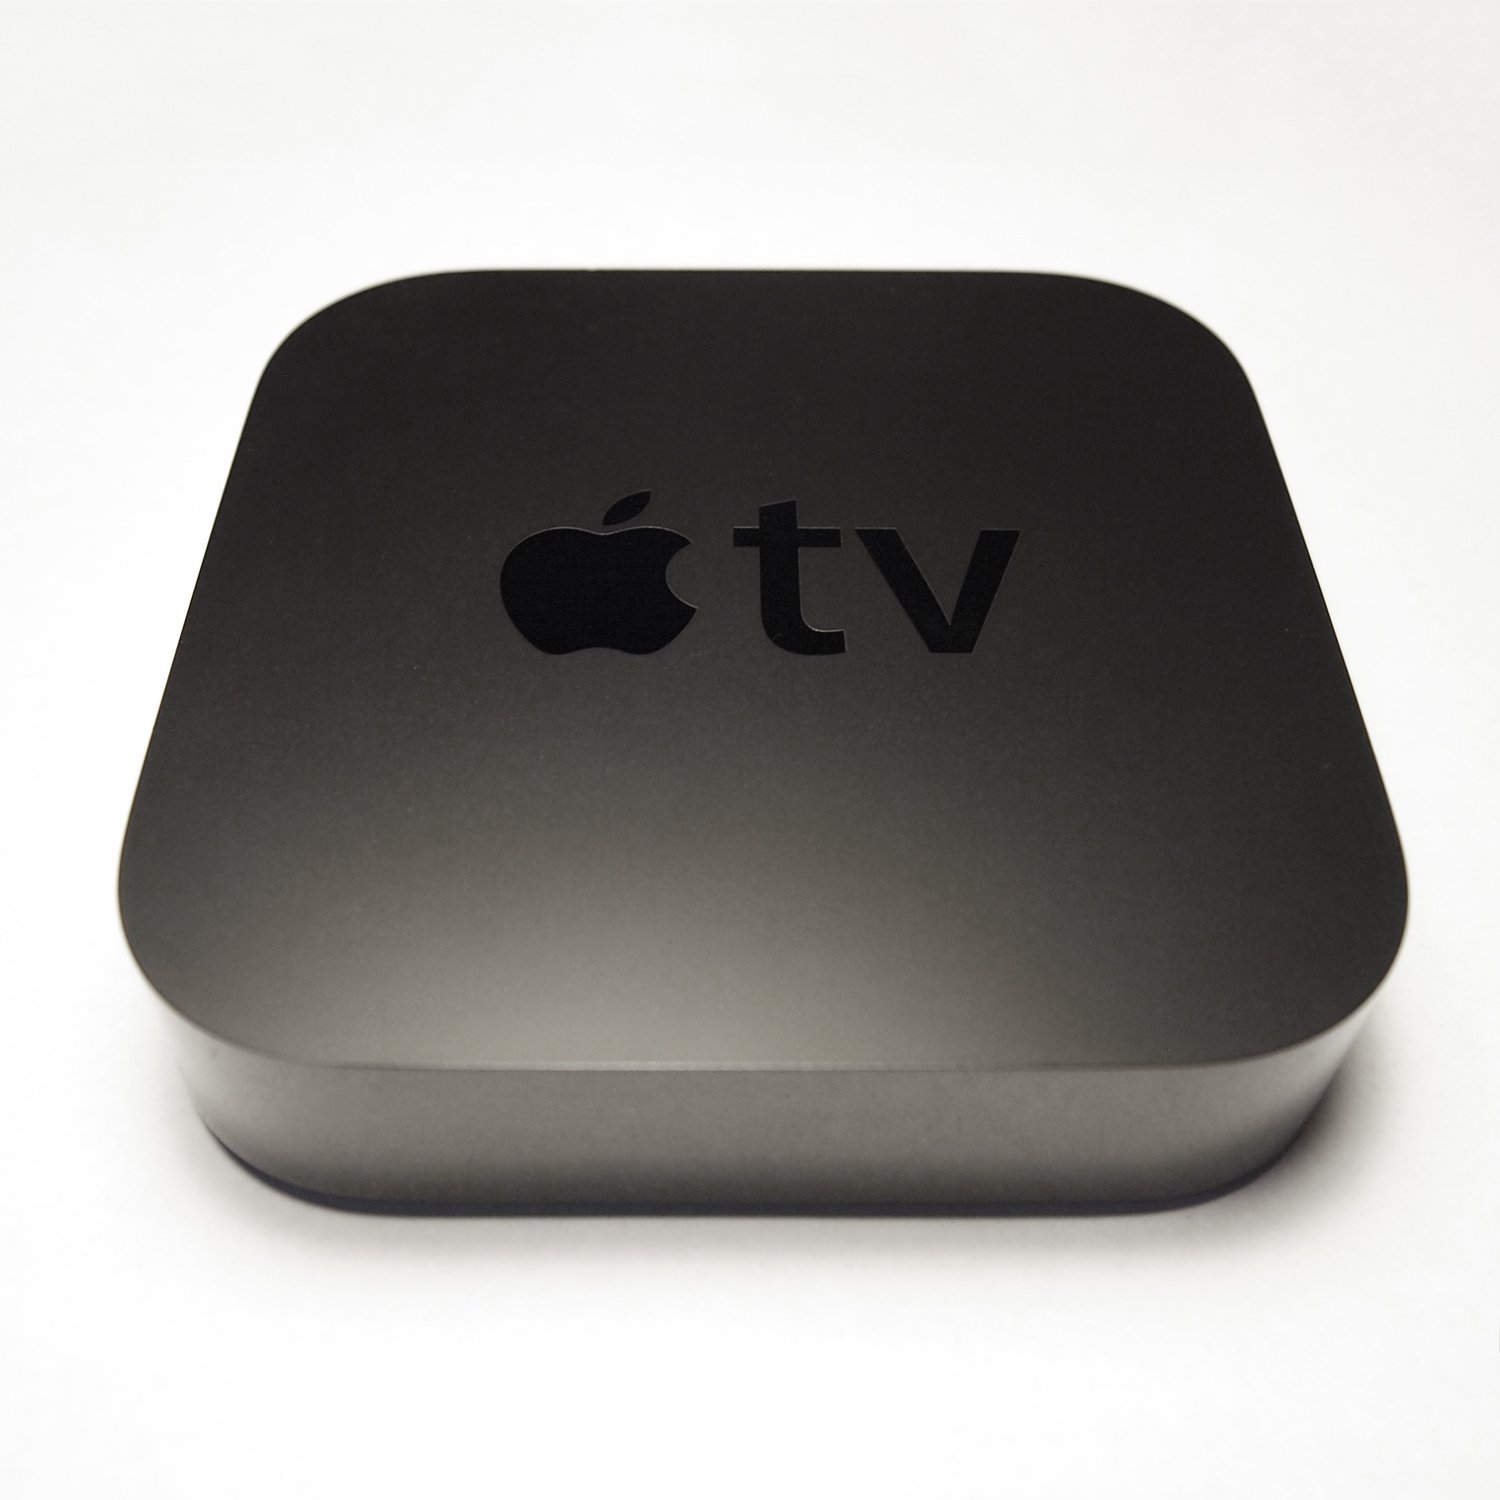 New Apple TV With A8 CPU Will Support 4K Video